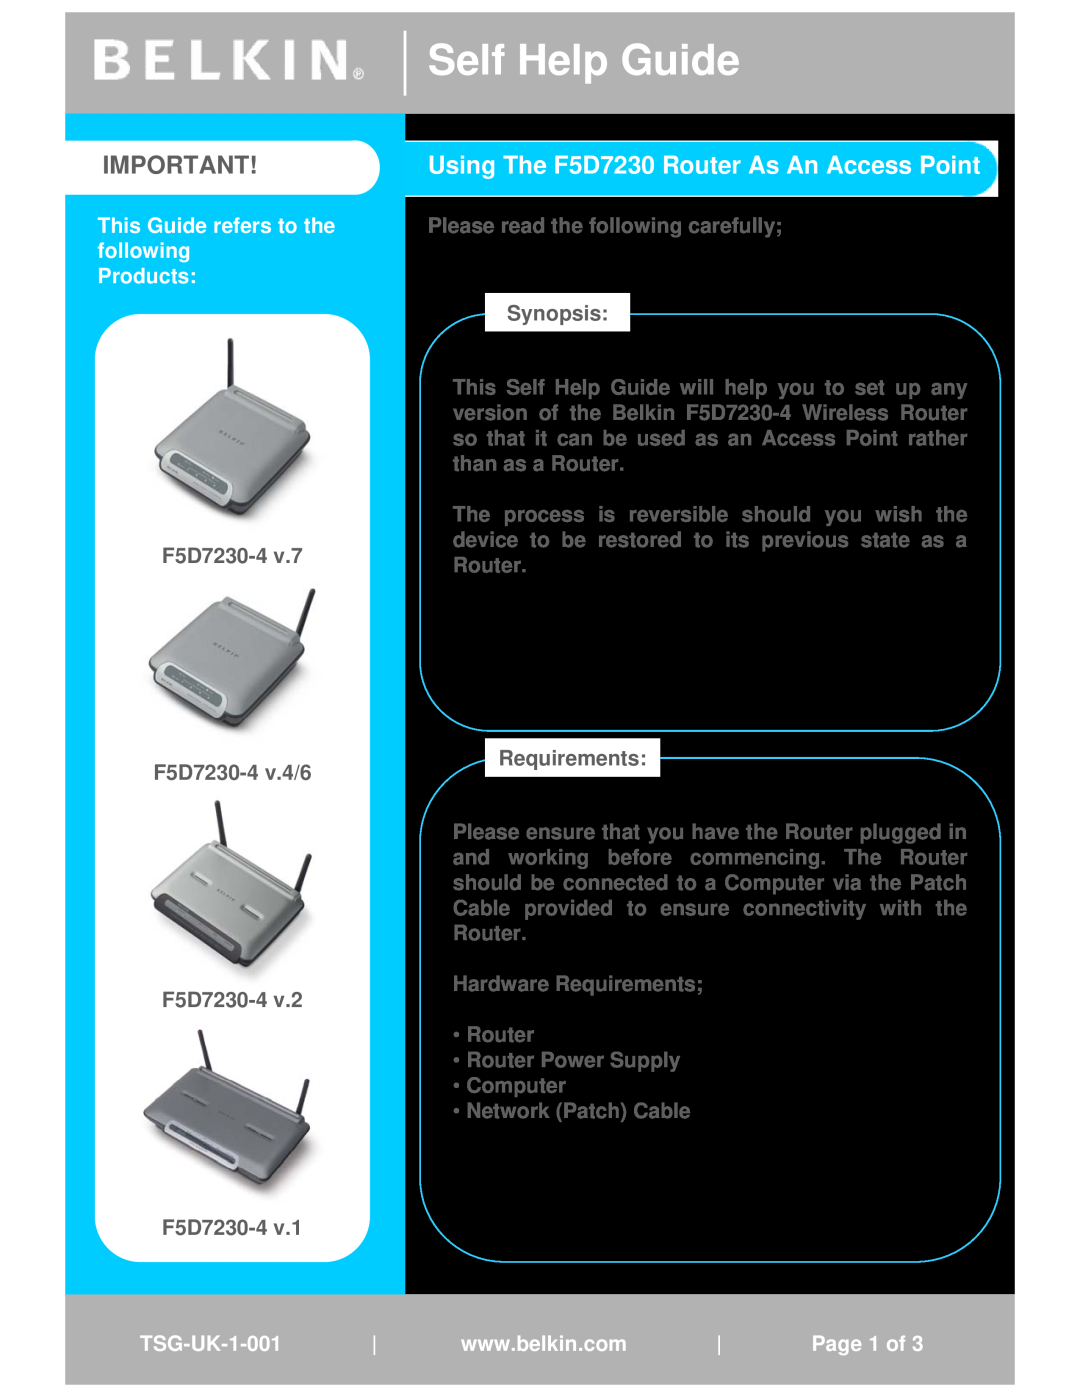 Belkin manual Self Help Guide, Using The F5D7230 Router As An Access Point, This Guide refers to the following Products 